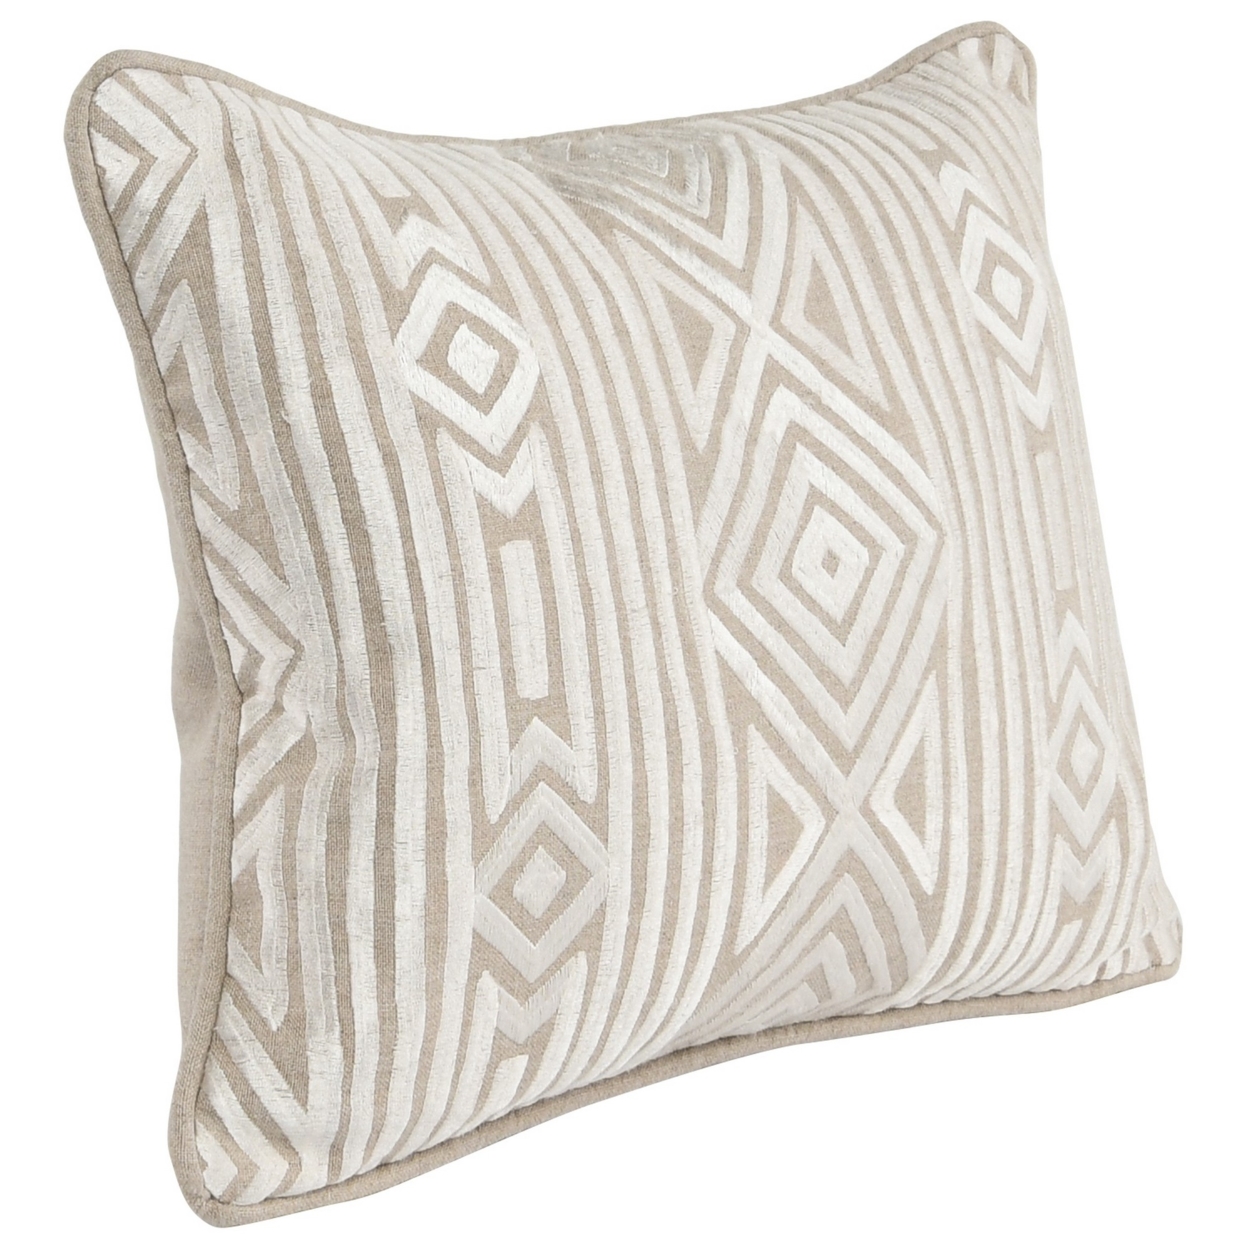 12 X 16 Square Linen Accent Throw Pillow, Tribal Accent, Piped Edges, Ivory, Saltoro Sherpi